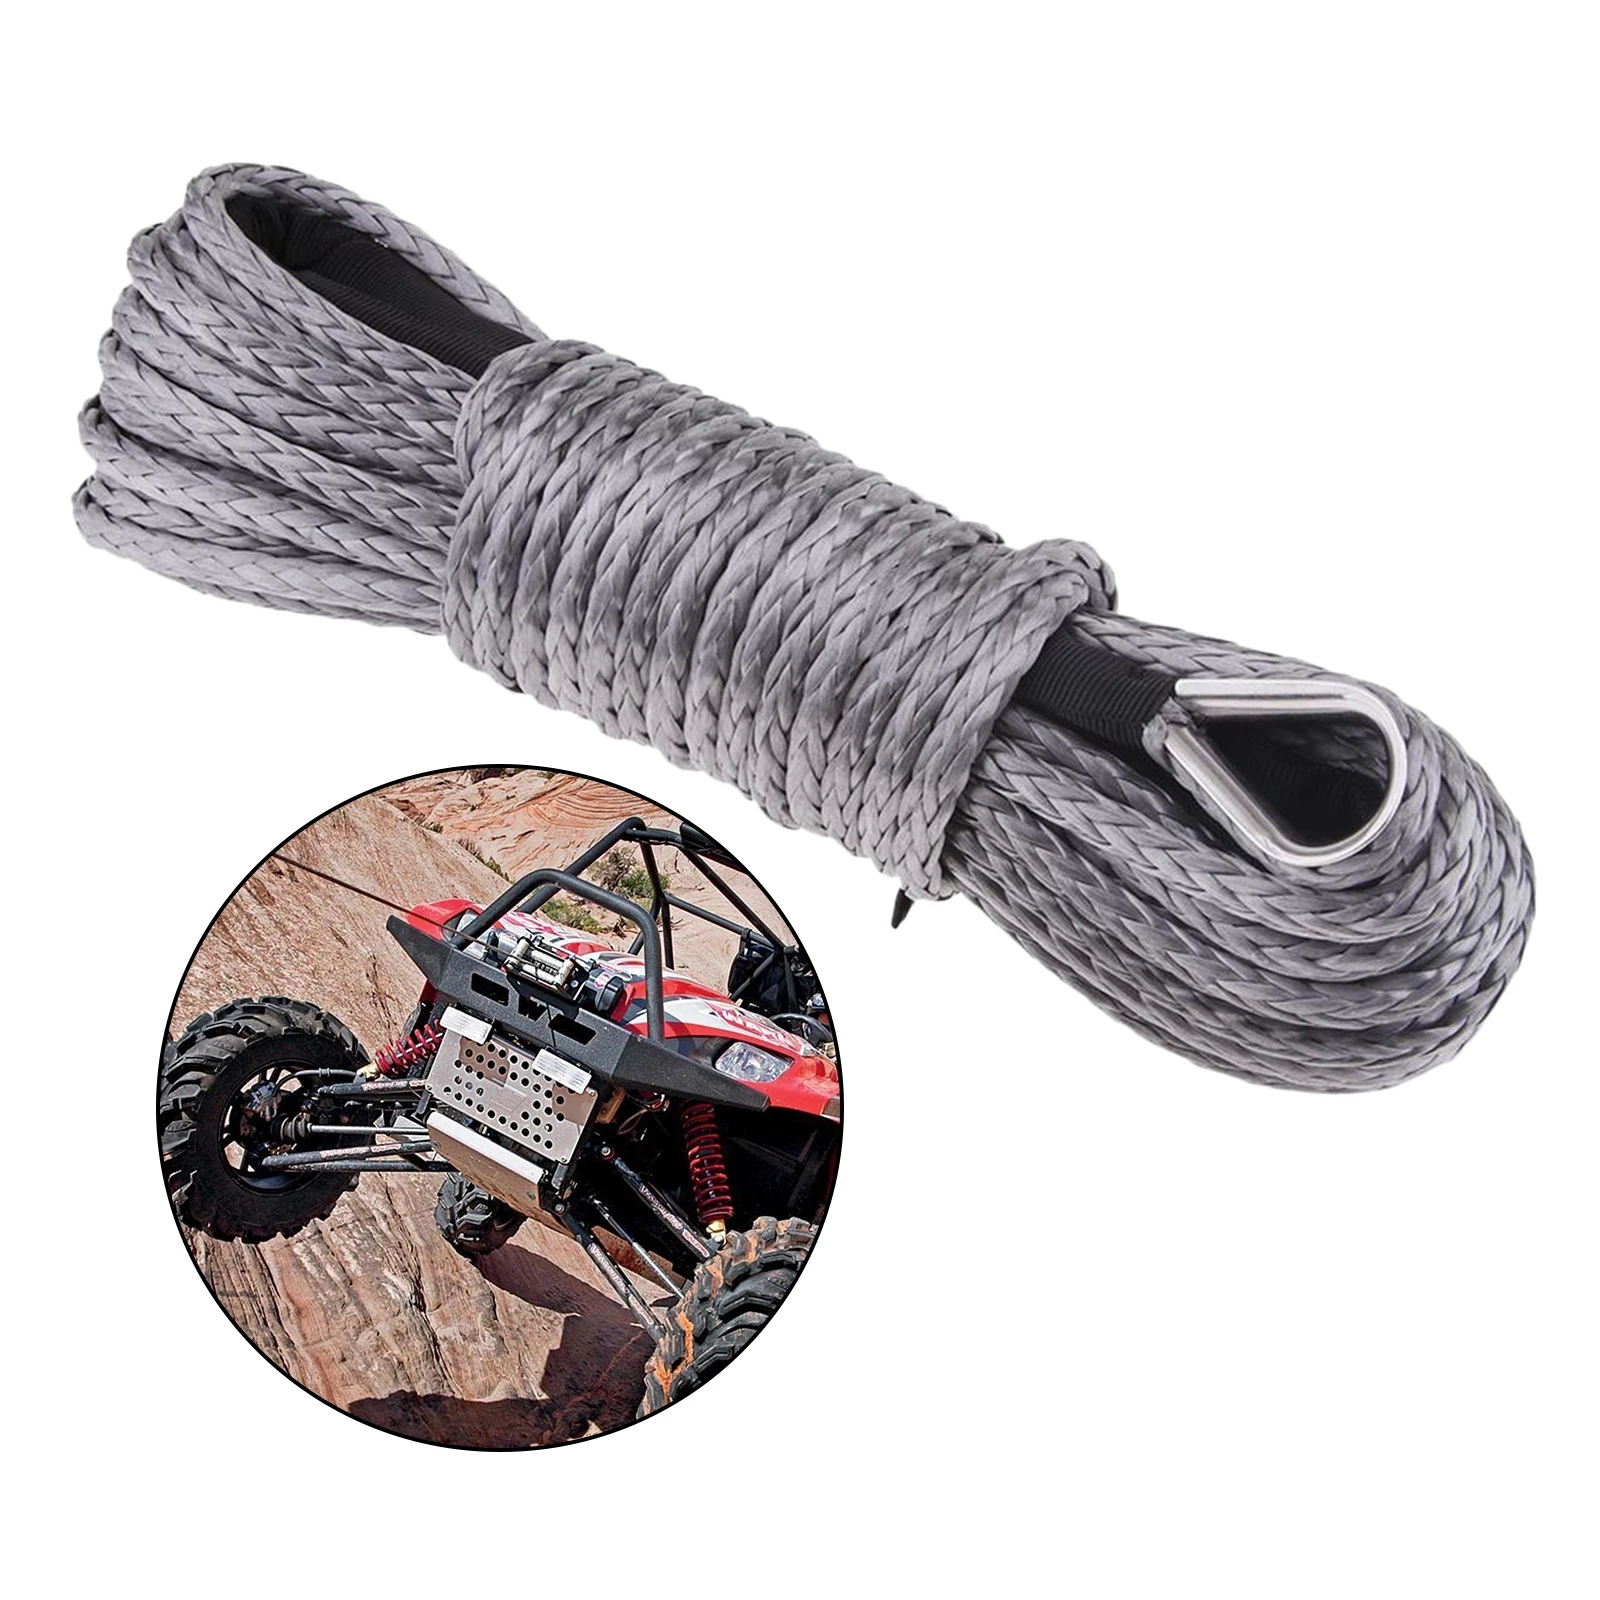 Durable 1/4 Inch x 50 Feet Synthetic Winch Line Cable Rope for ATV UTV